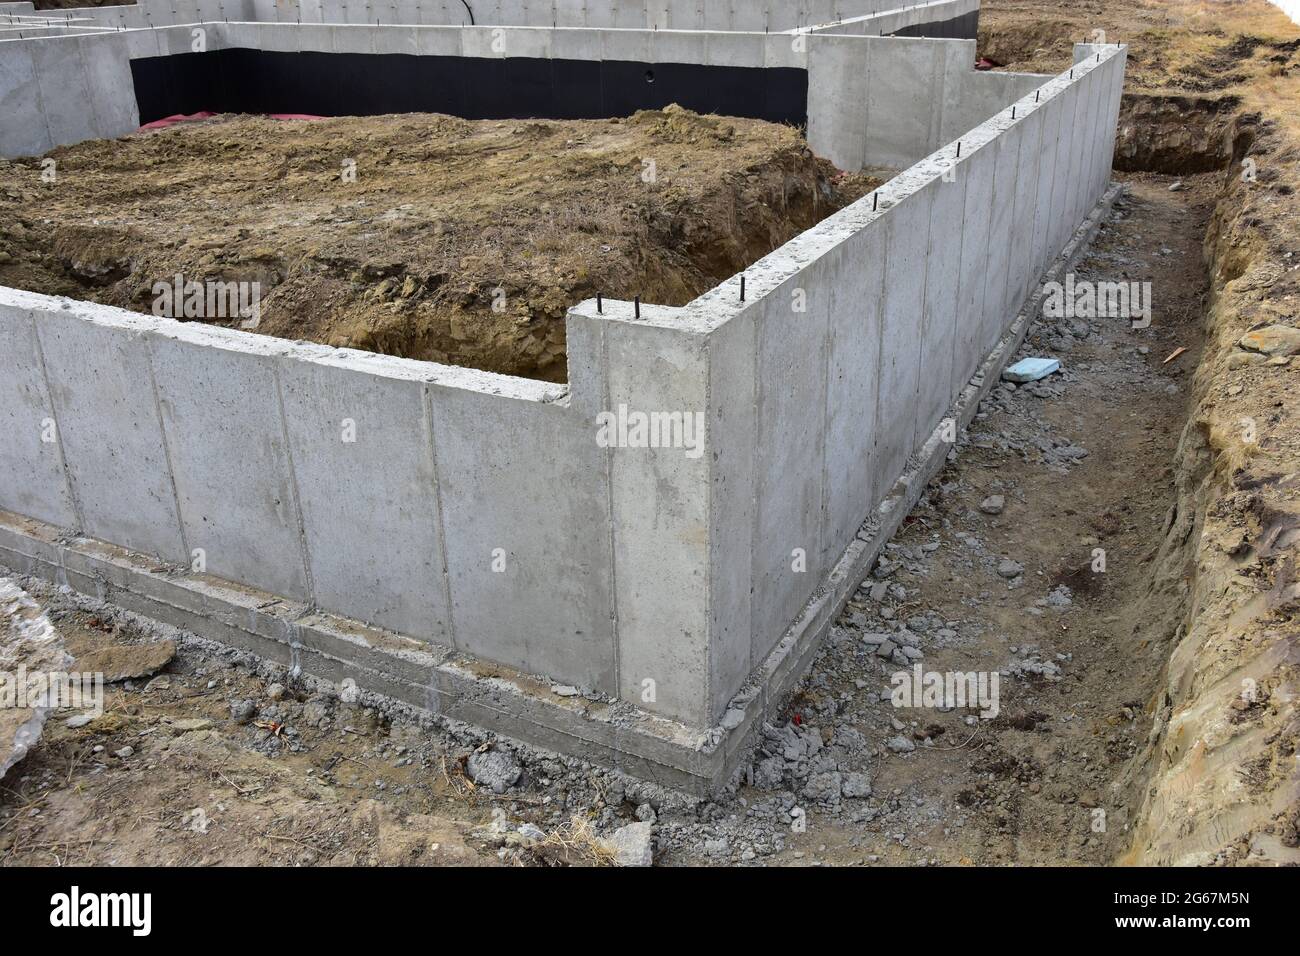 Concrete footings and basement walls complete ready for next step in construction process for residential home. Stock Photo